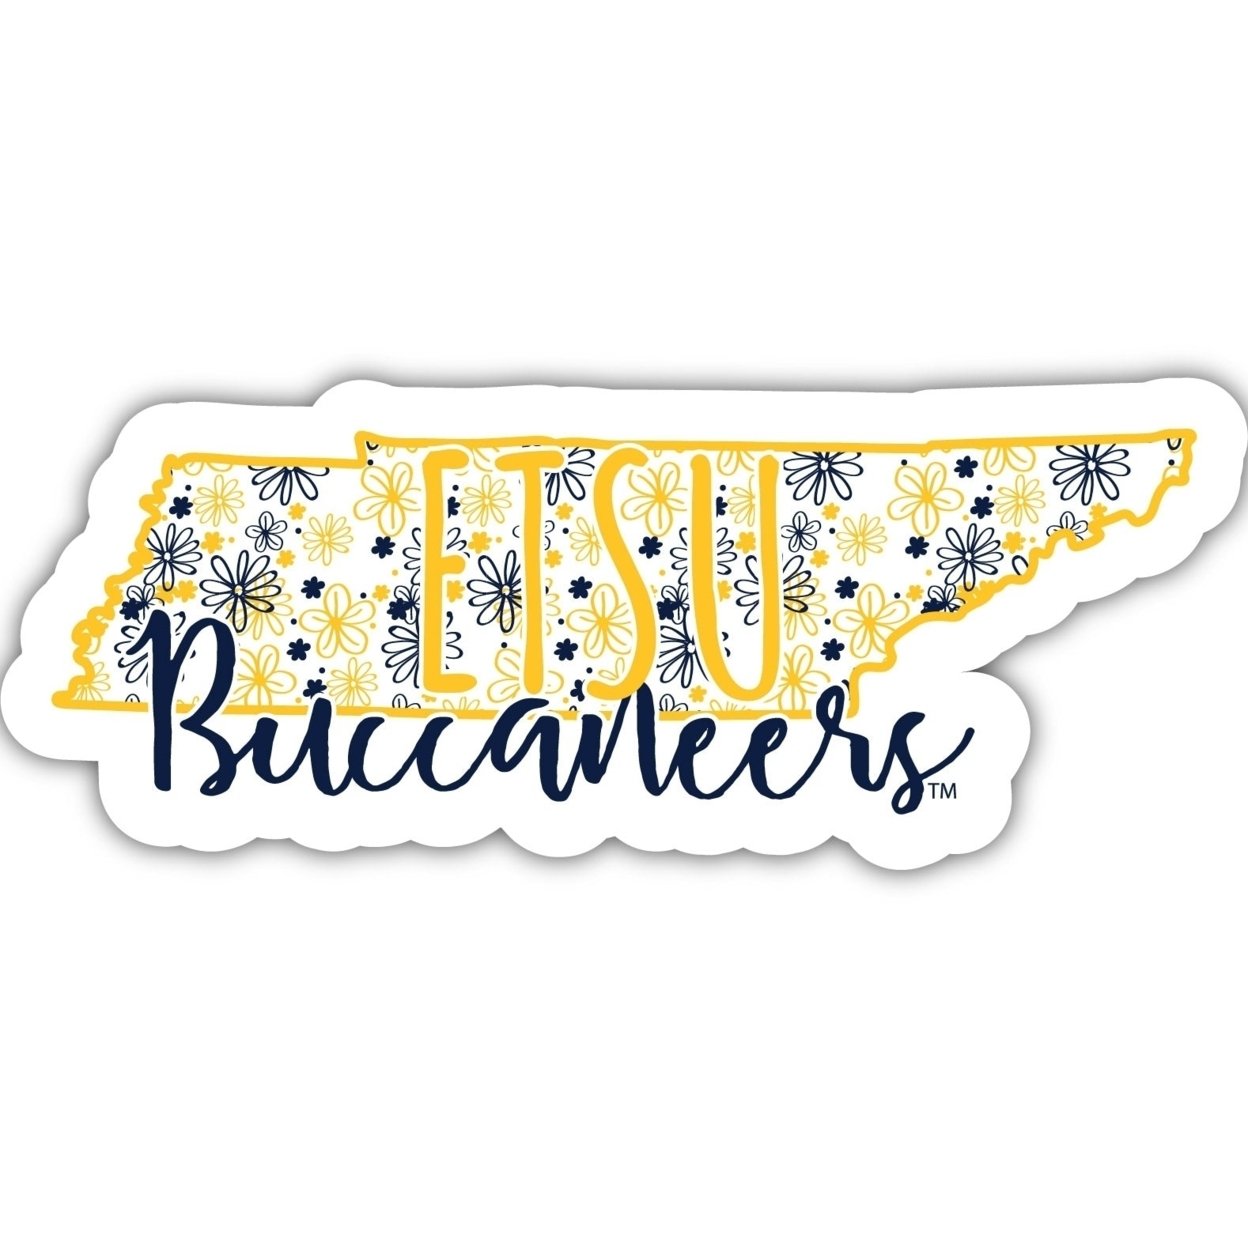 East Tennessee State University Floral State Die Cut Decal 2-Inch